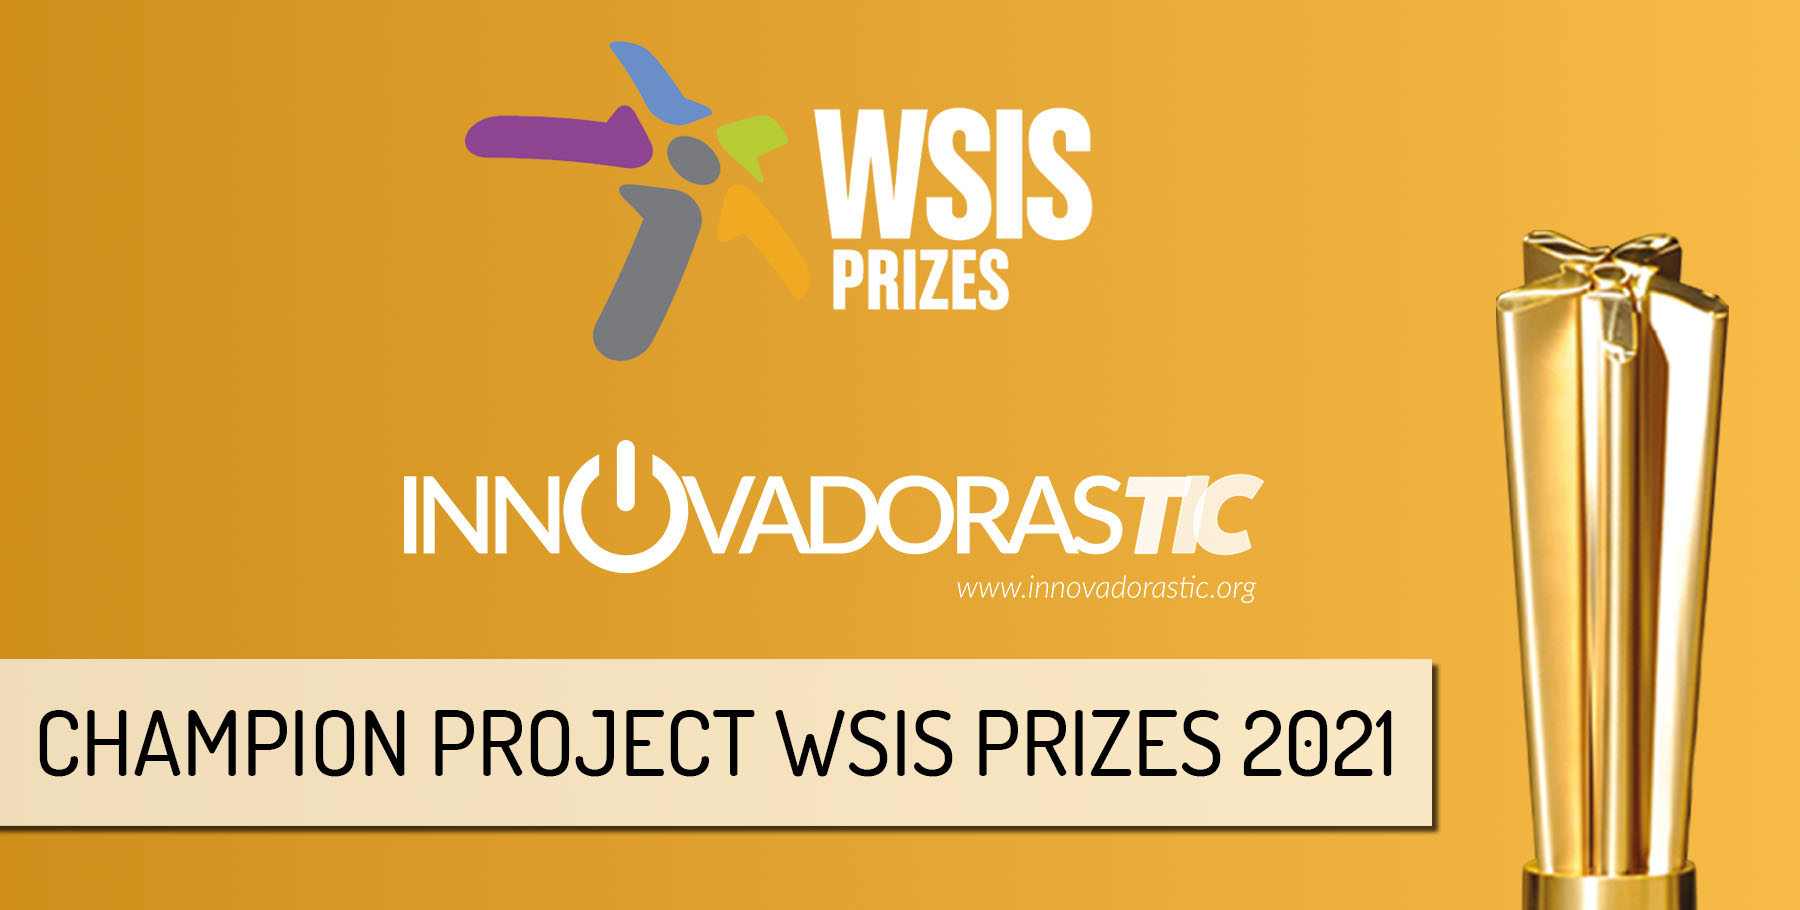 InnovadorasTIC among the 5 champion projects of the WSIS Prizes 2021